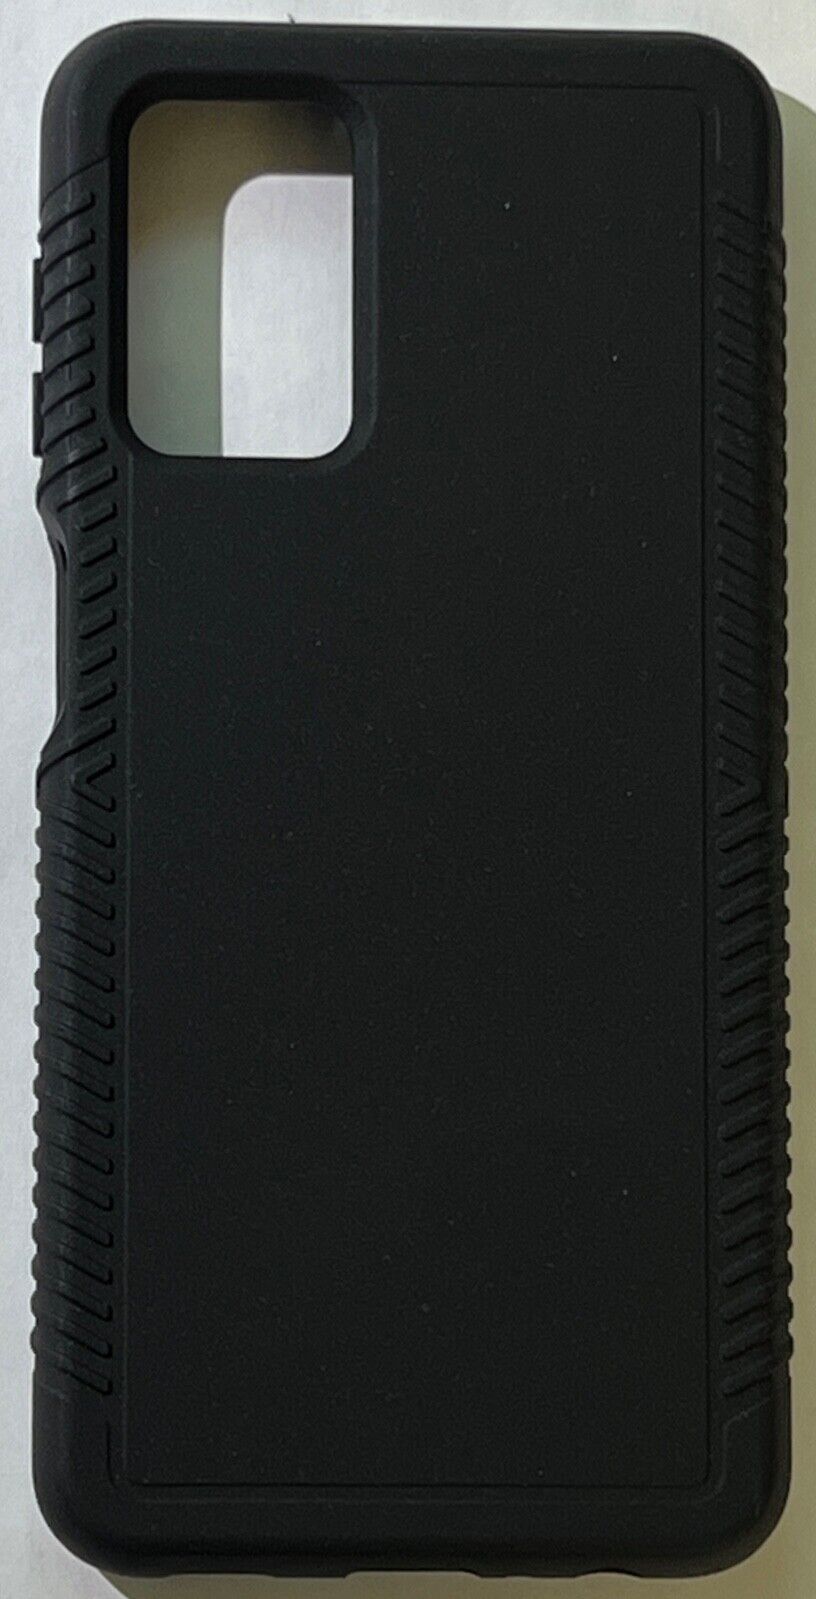 NEW Body Glove Slim Textured Rubberized Case for Samsung Galaxy A32 5G - Black